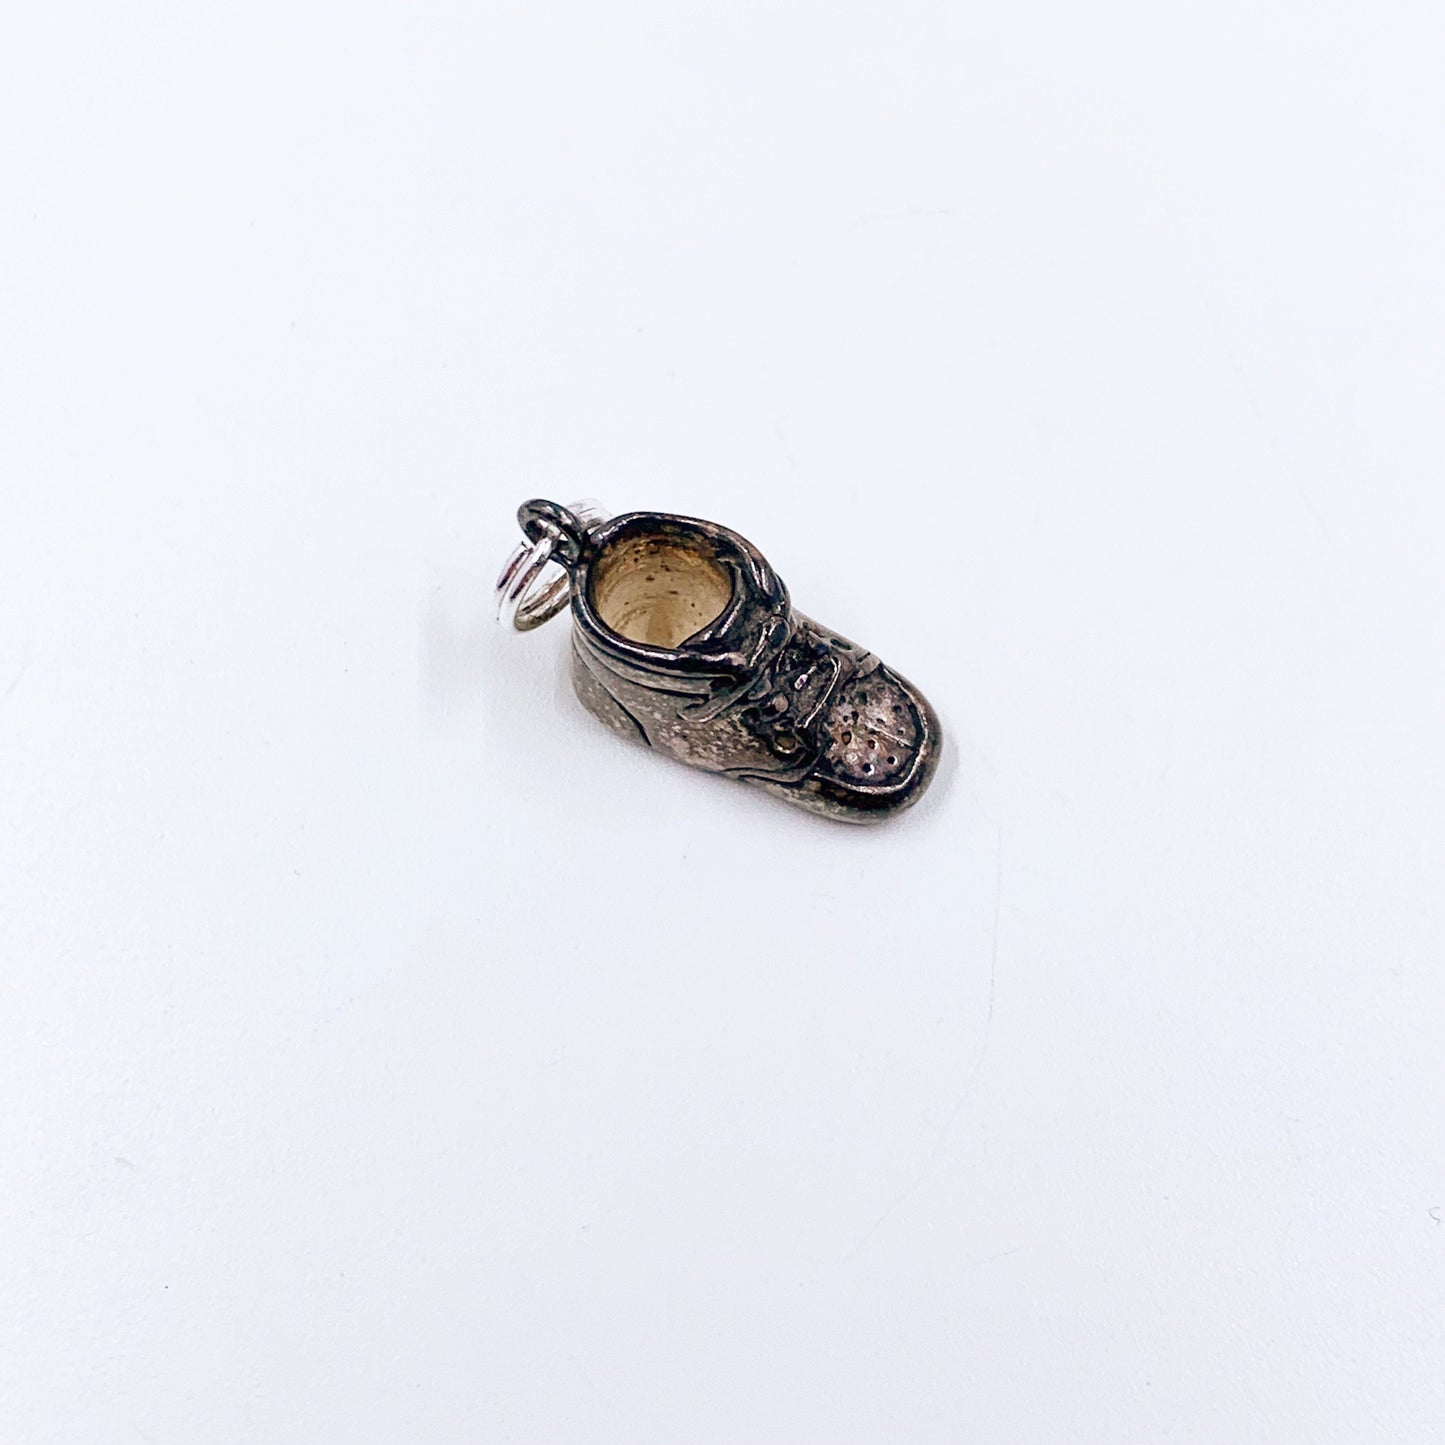 Vintage Silver Baby Shoe Charm